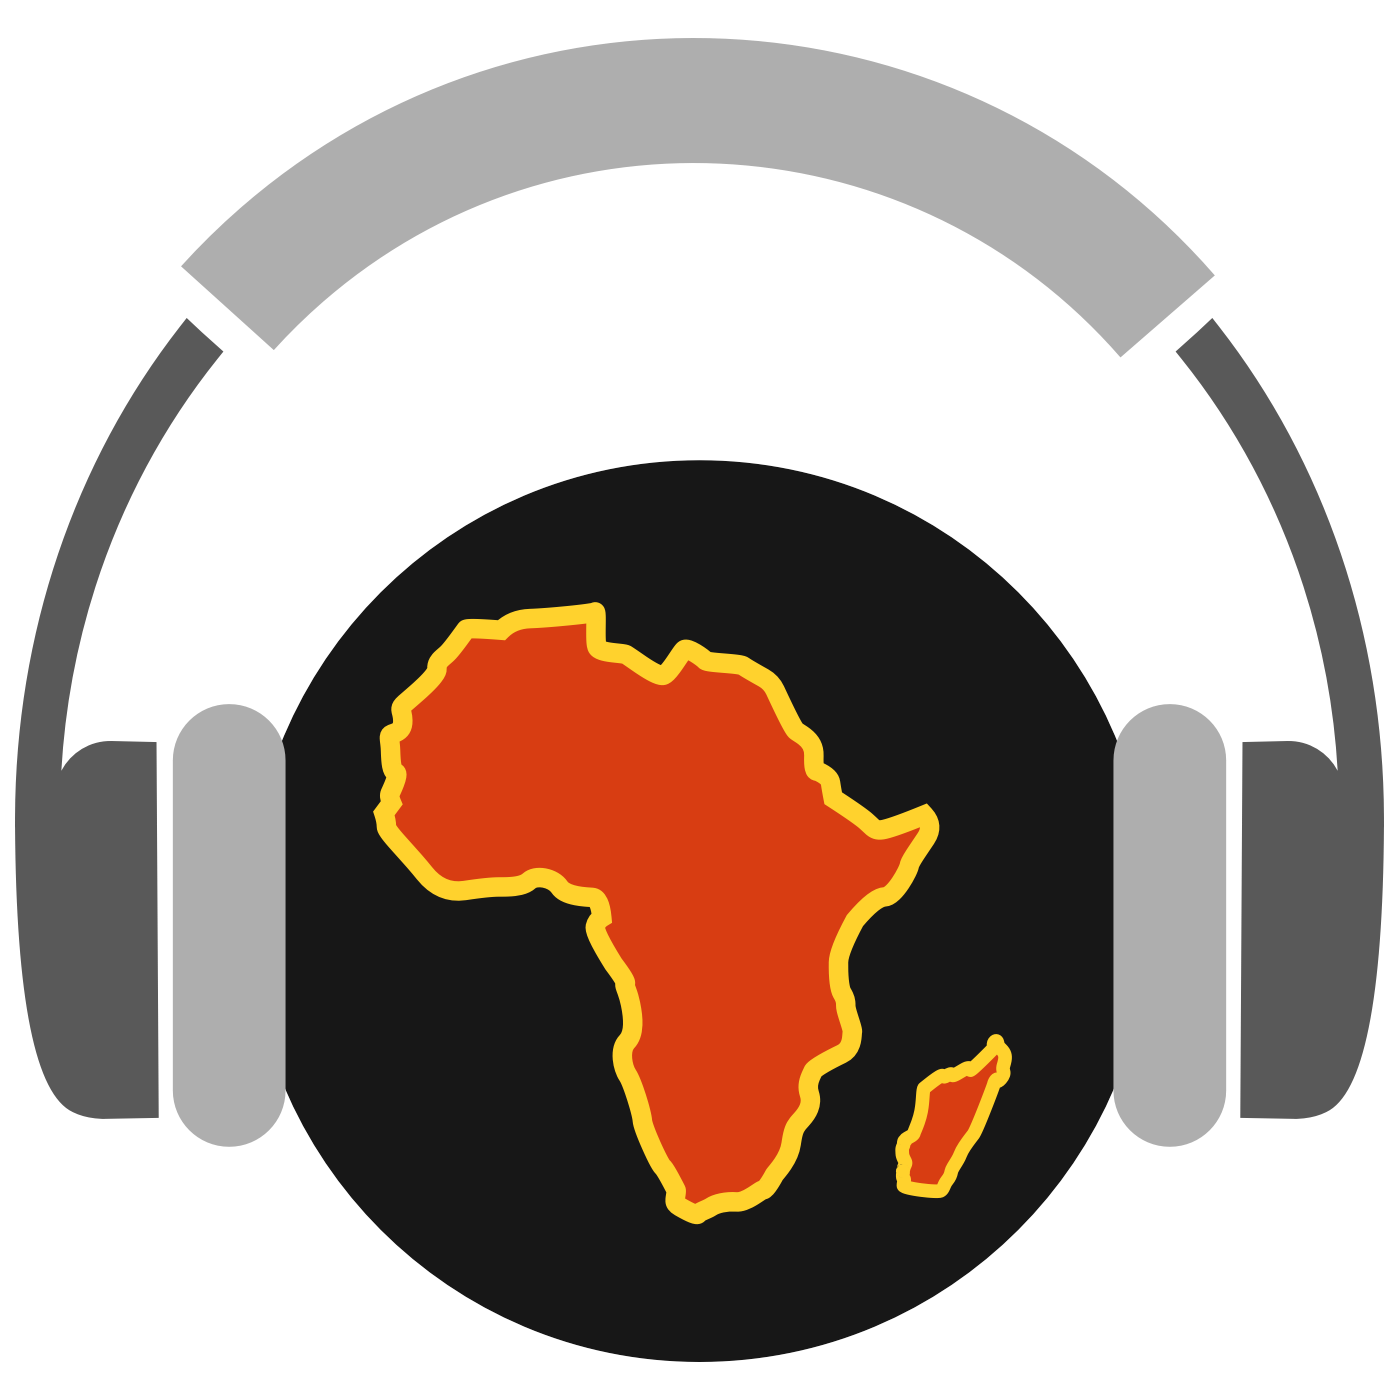 Africa Past and Present logo including globe and headphones.